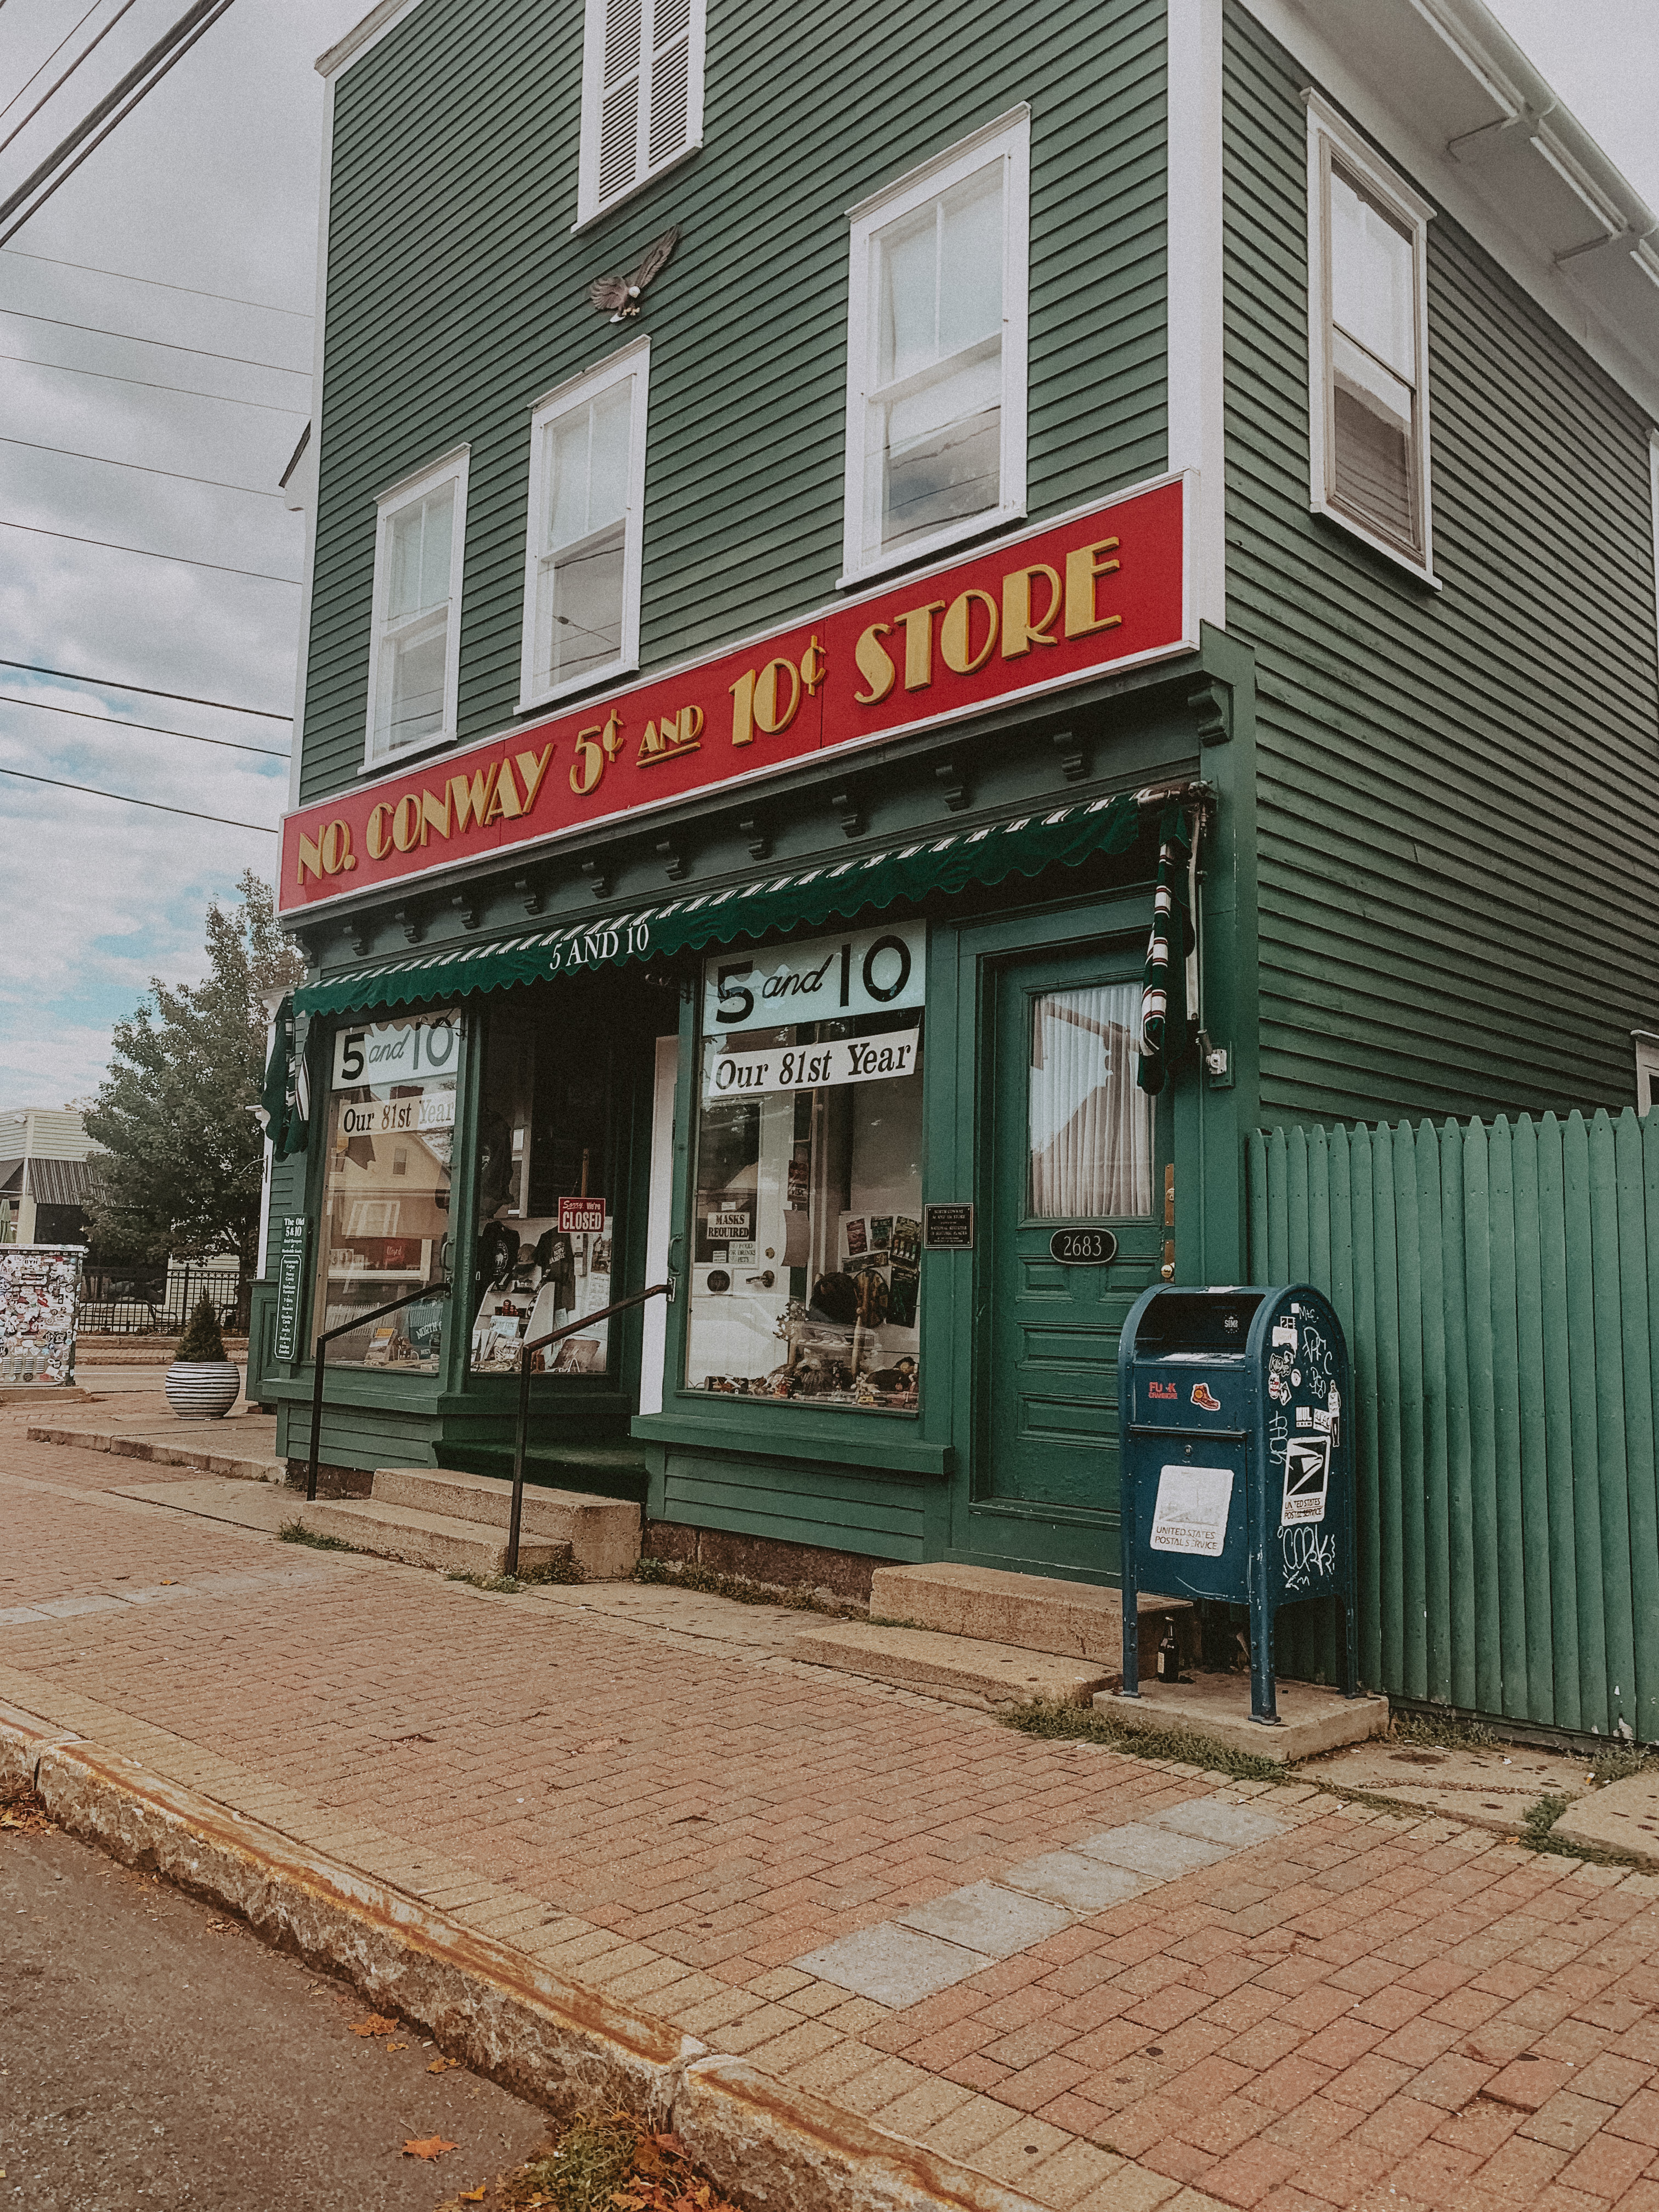 North Conway, New Hampshire Travel Guide - 5 and 10 cent store #newengland #travel #newhampshire #roadtrip #westchestercounty #northconway #newhampshiretravel #mountwashington #newenglandtravel 